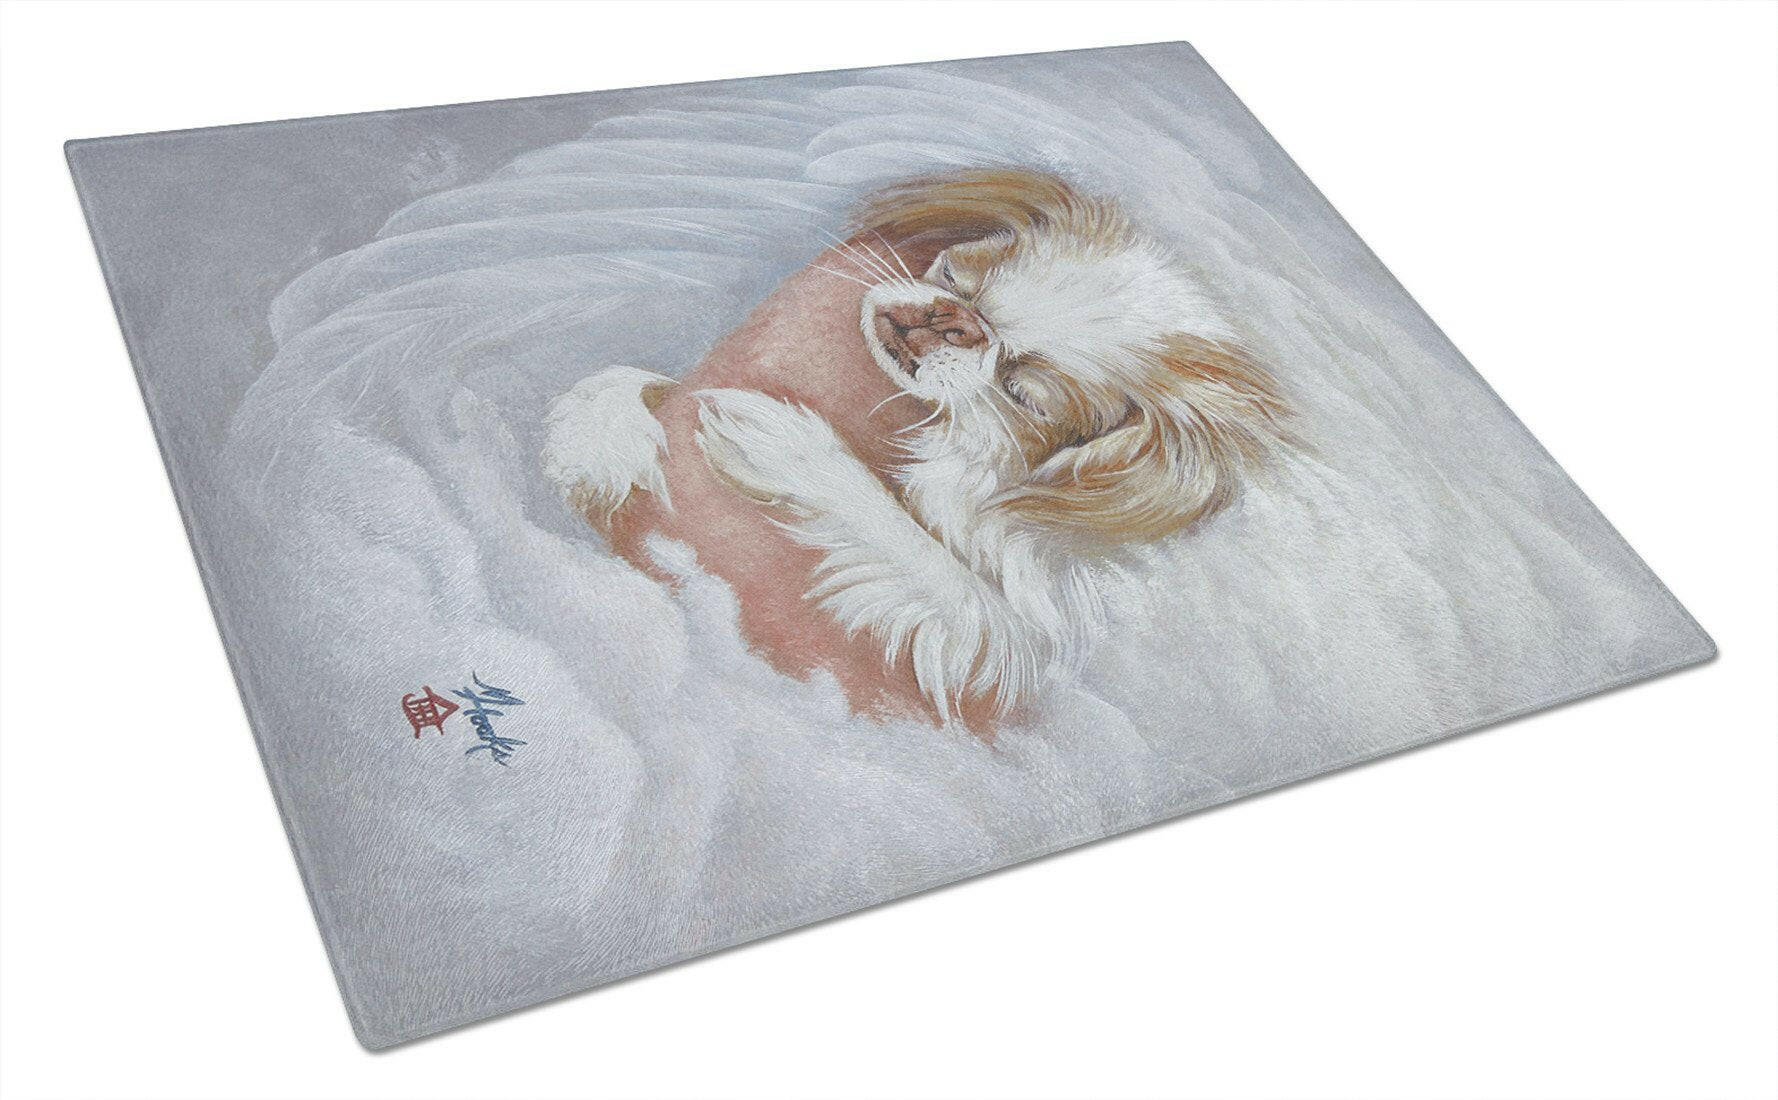 Japanese Chin in an Angels Arms Glass Cutting Board Large MH1037LCB by Caroline's Treasures